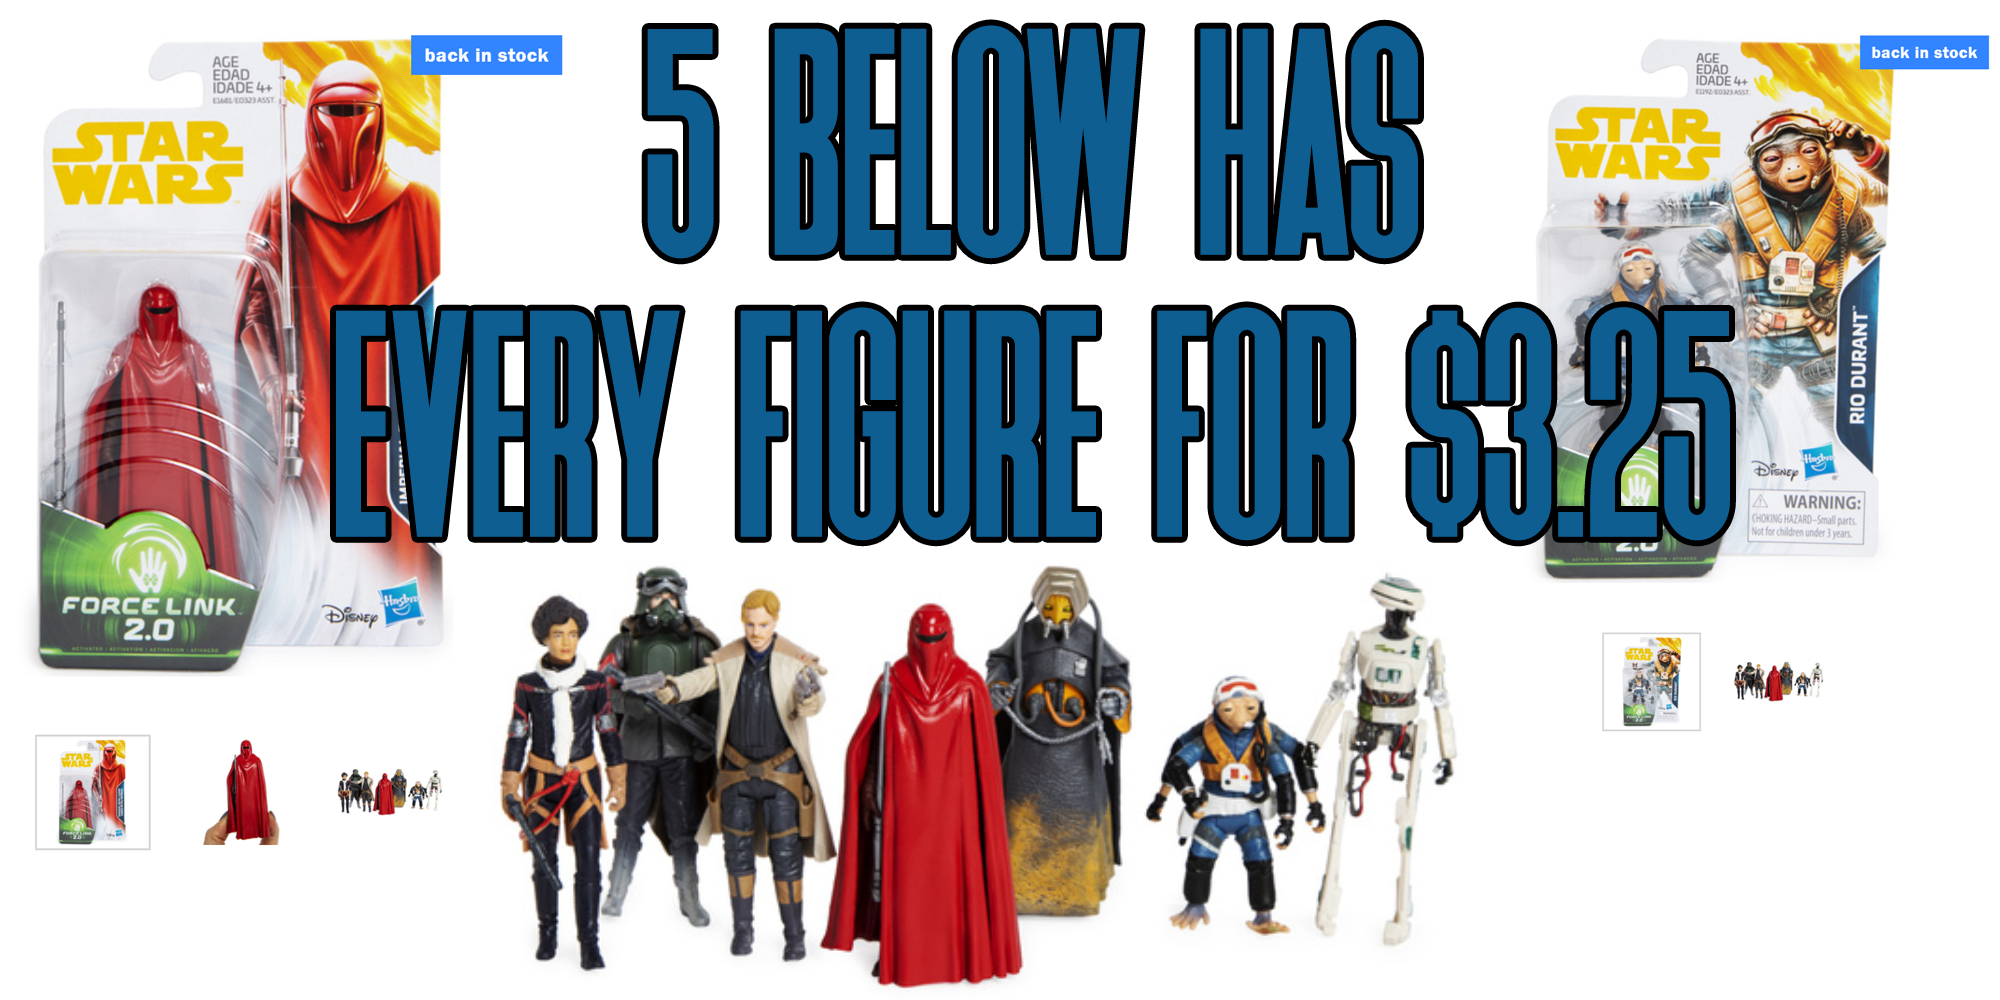 5 Below Has Every Figure For $3.25 On Their Website -> Plus A Coupon!